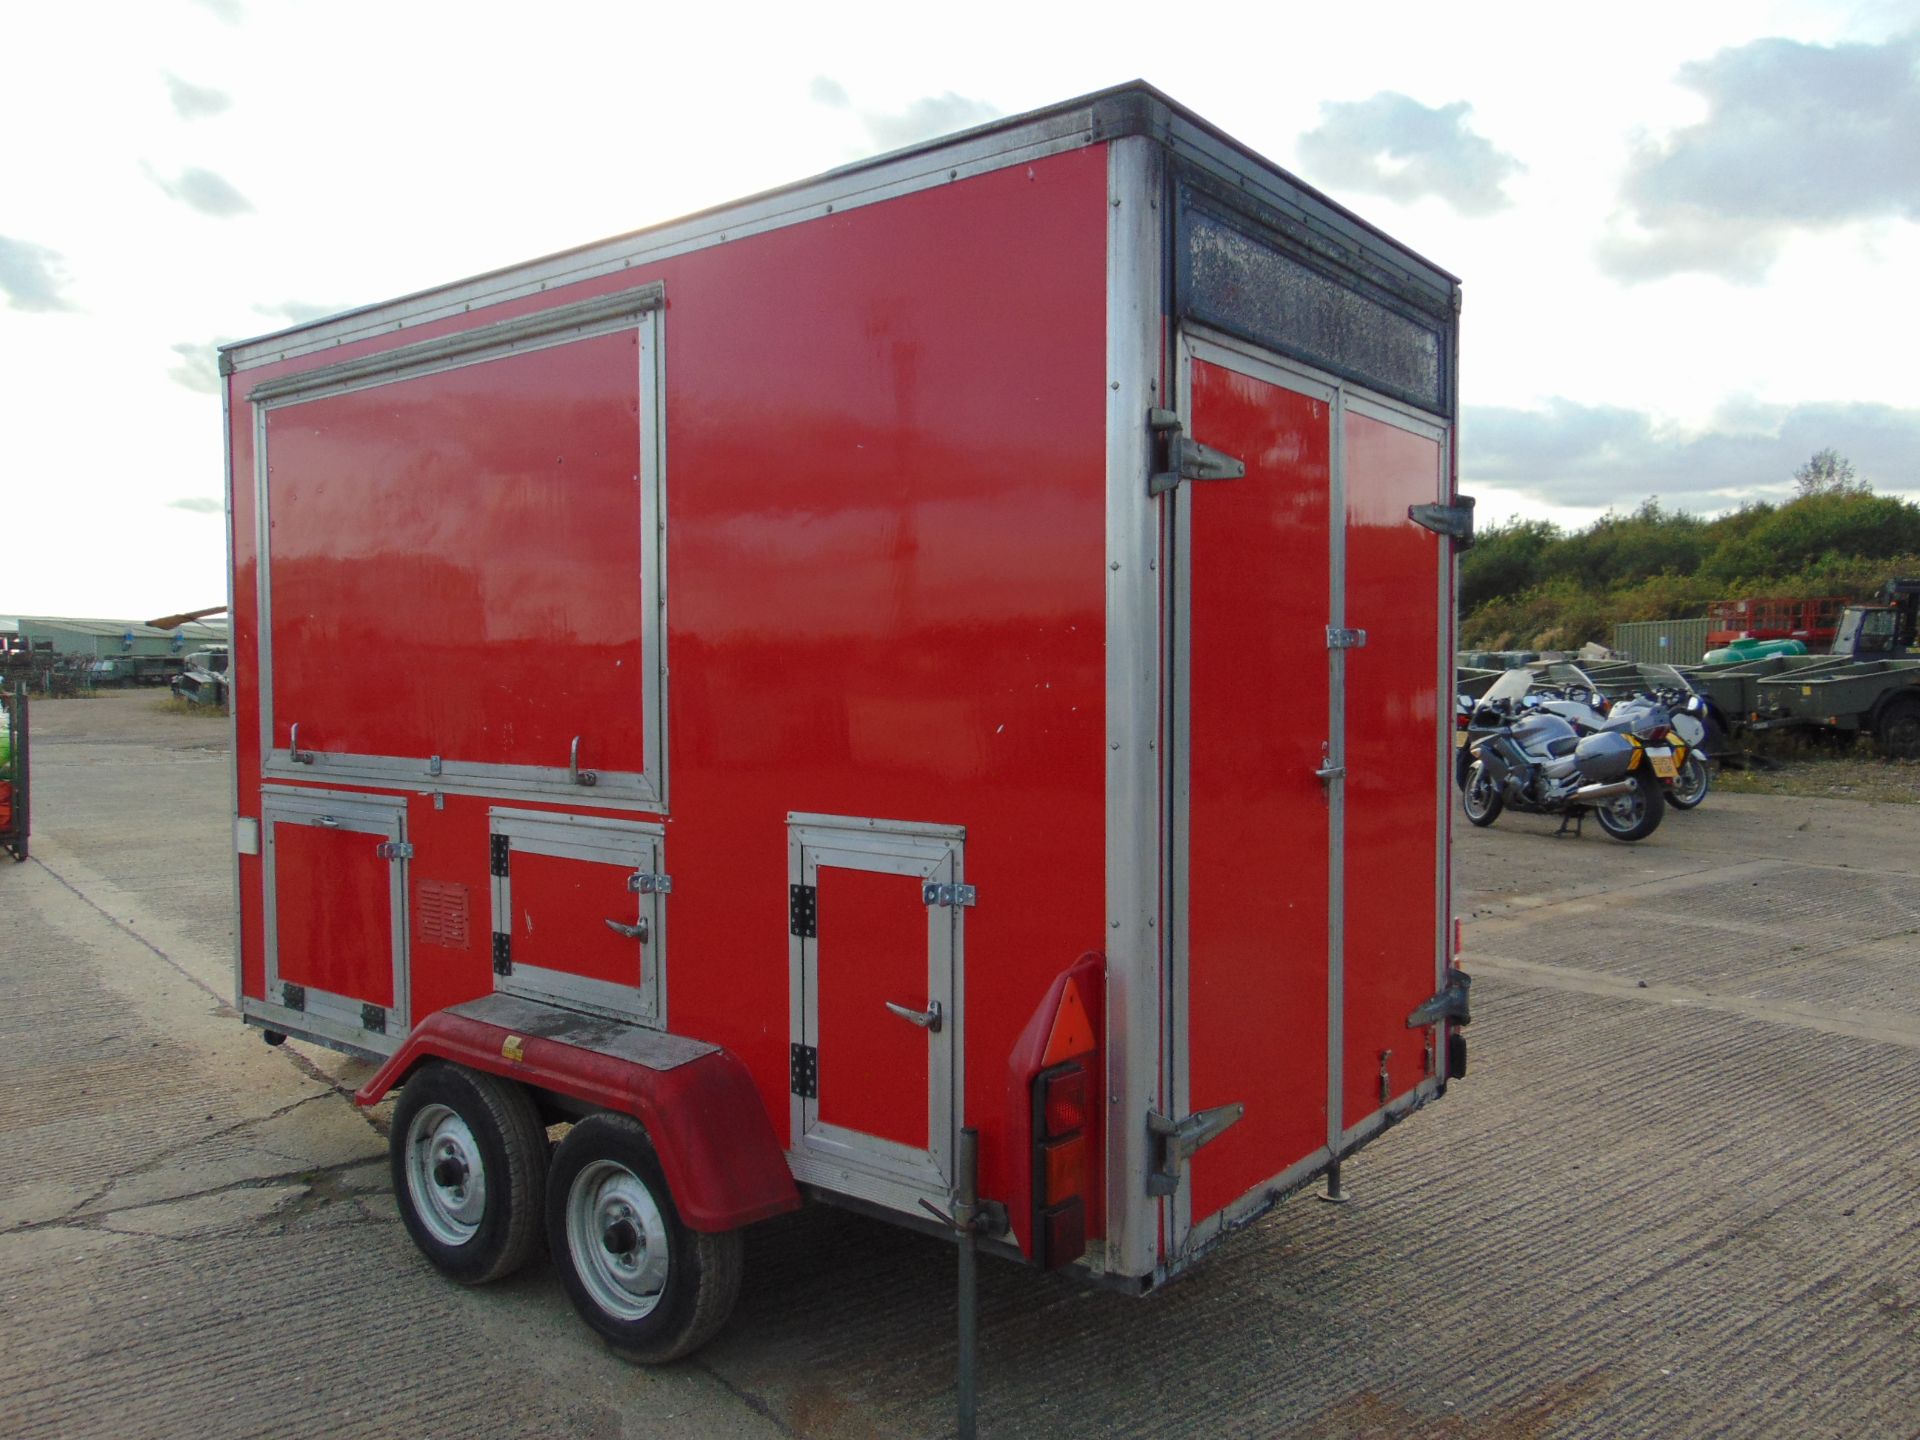 From UK Fire & Rescue Bingham 2 axle Show Trailer c/w spare wheel etc - Image 3 of 13